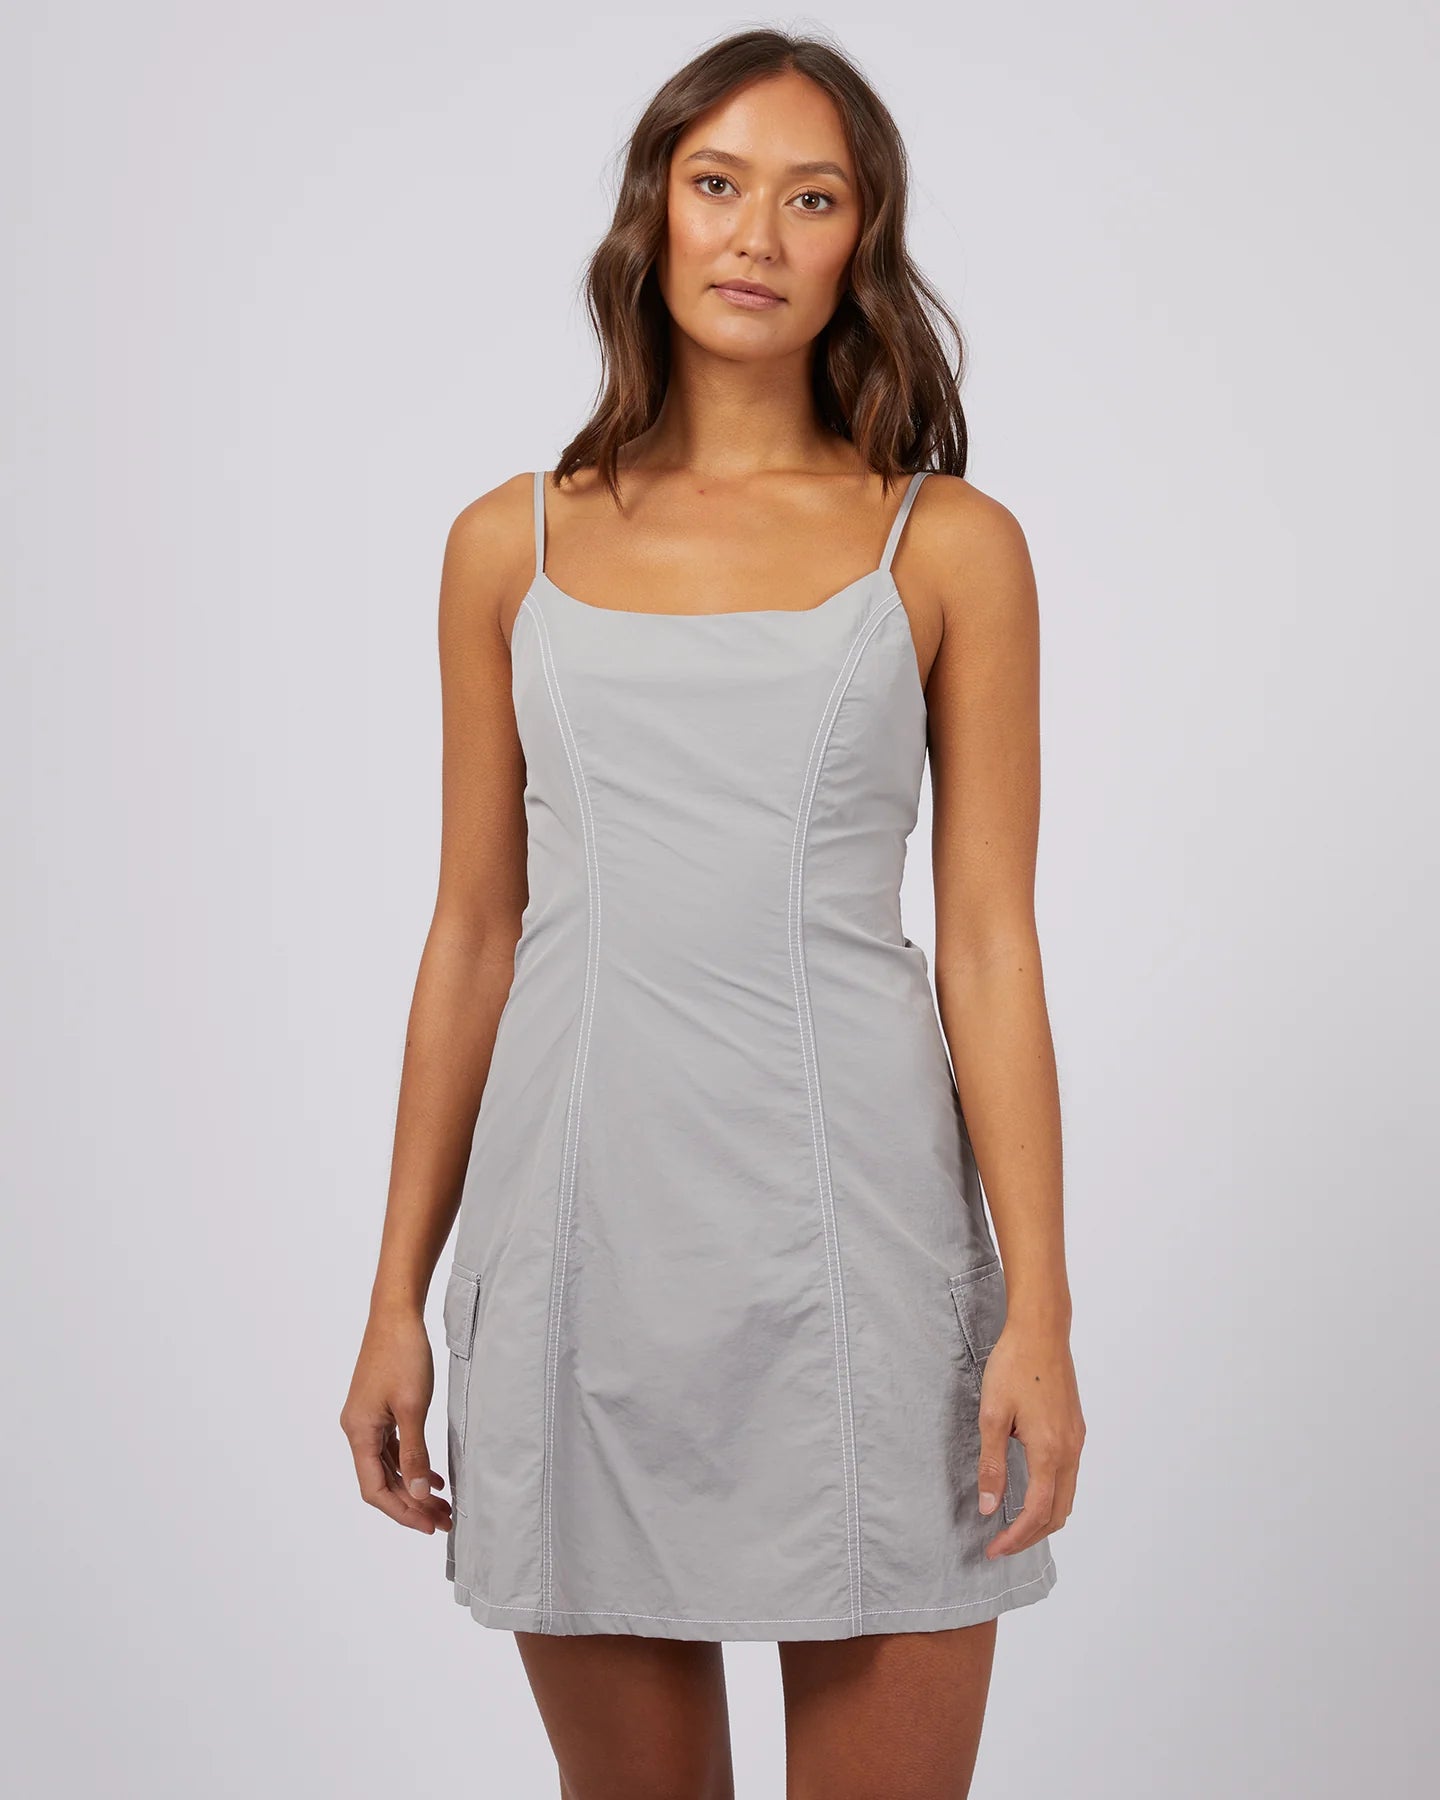 SILENT THEORY Ace Contrast Womens Dress - Grey